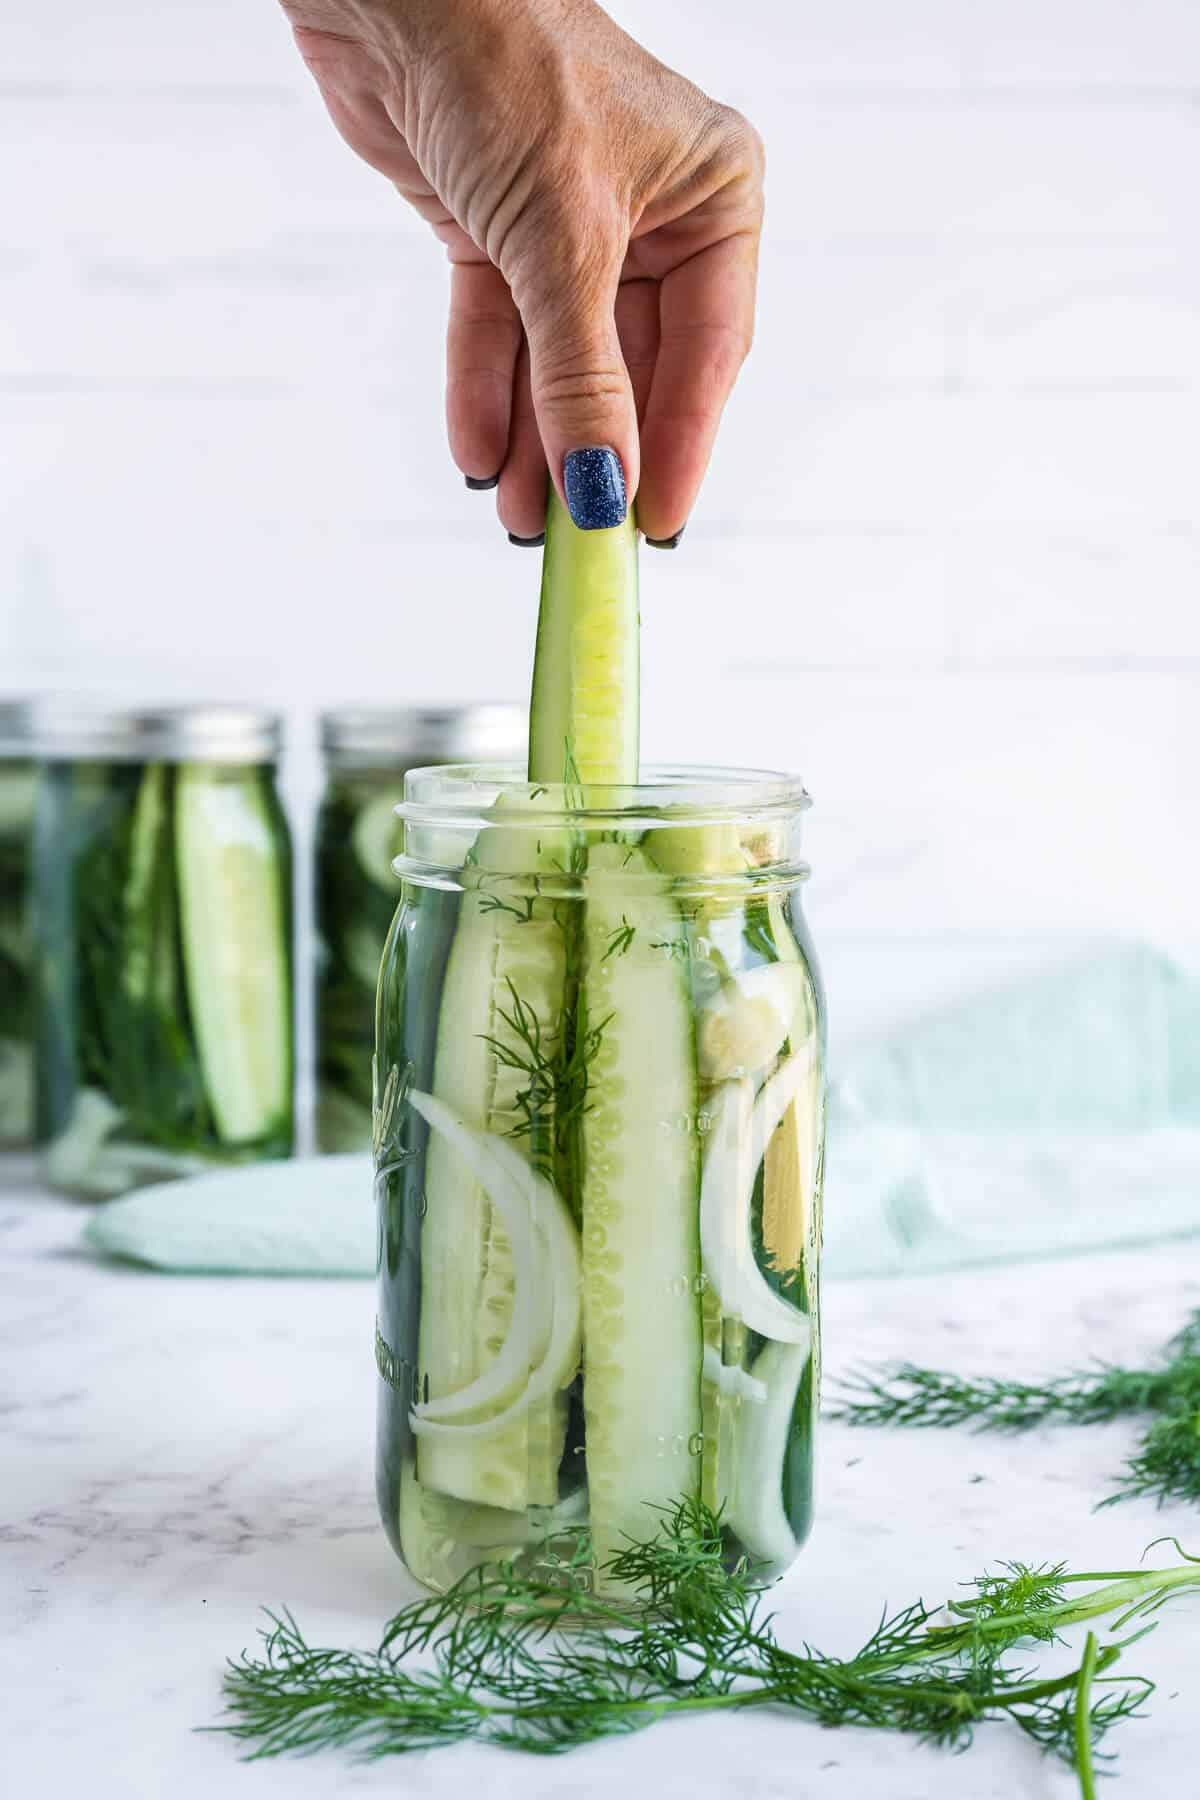 Spear shaped pickle being pulled out of a mason jar.